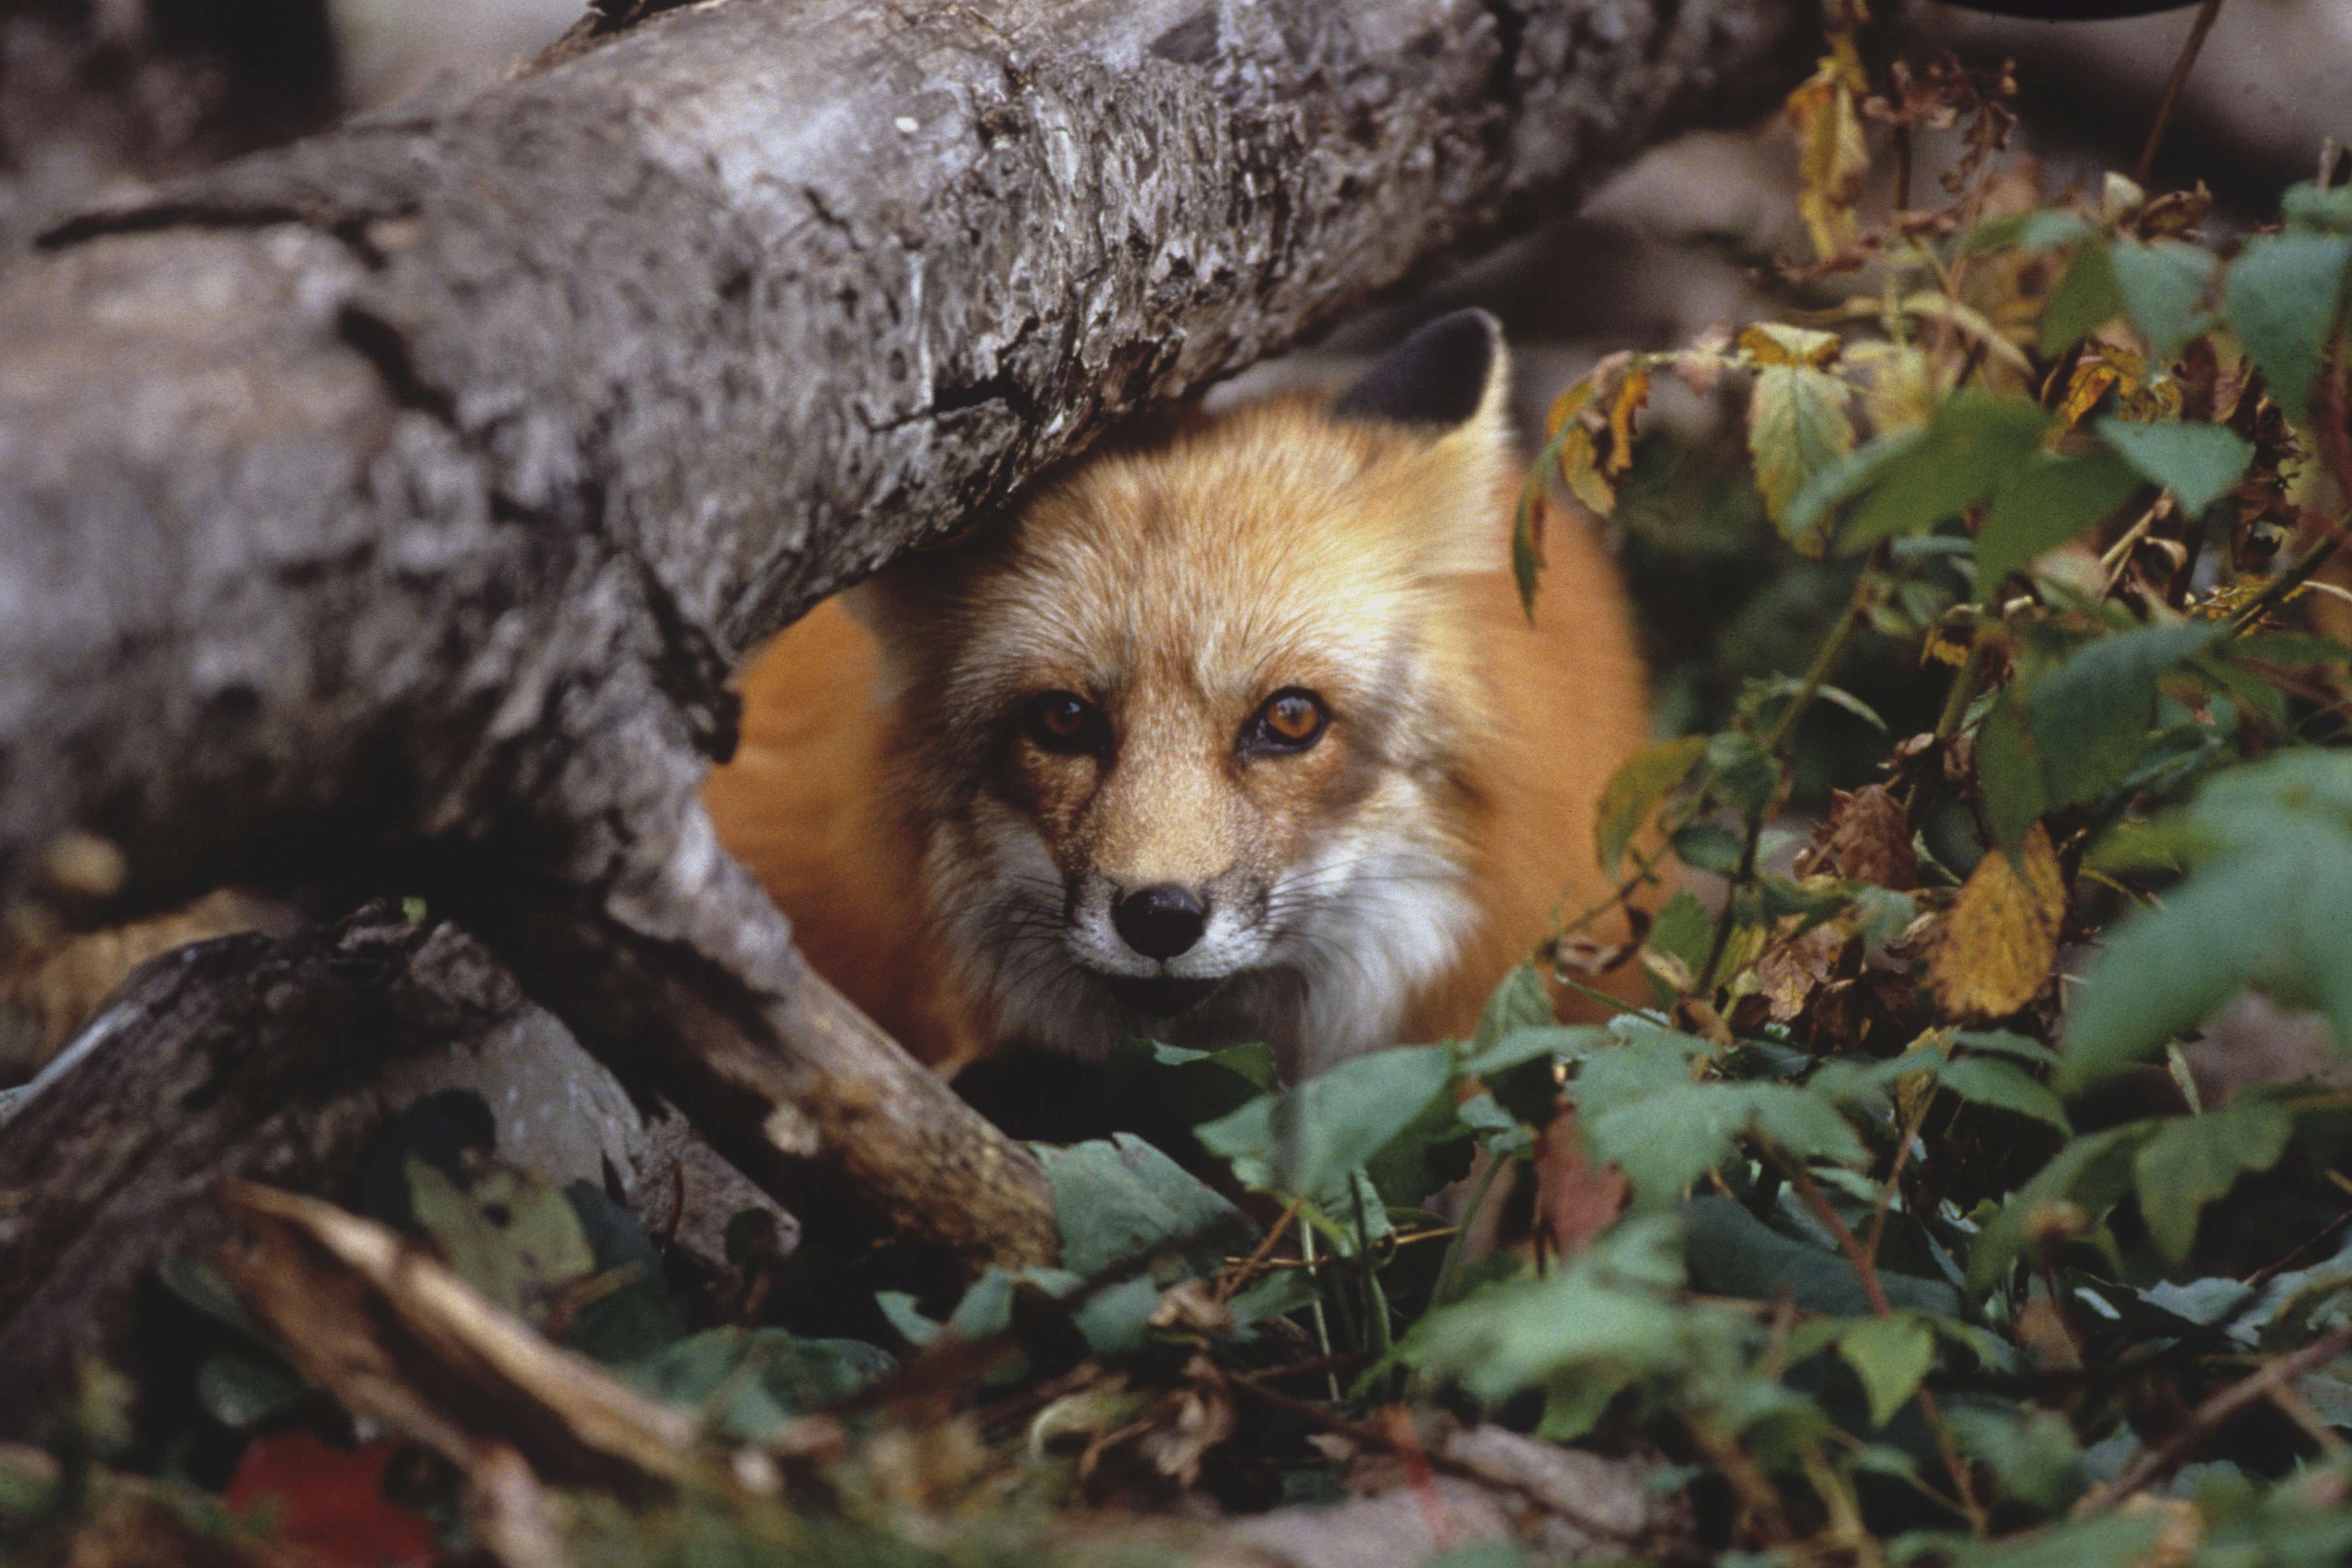 You can train yourself to spot creatures hidden in the forest. Photo by Howard Buffett/WWF-US.